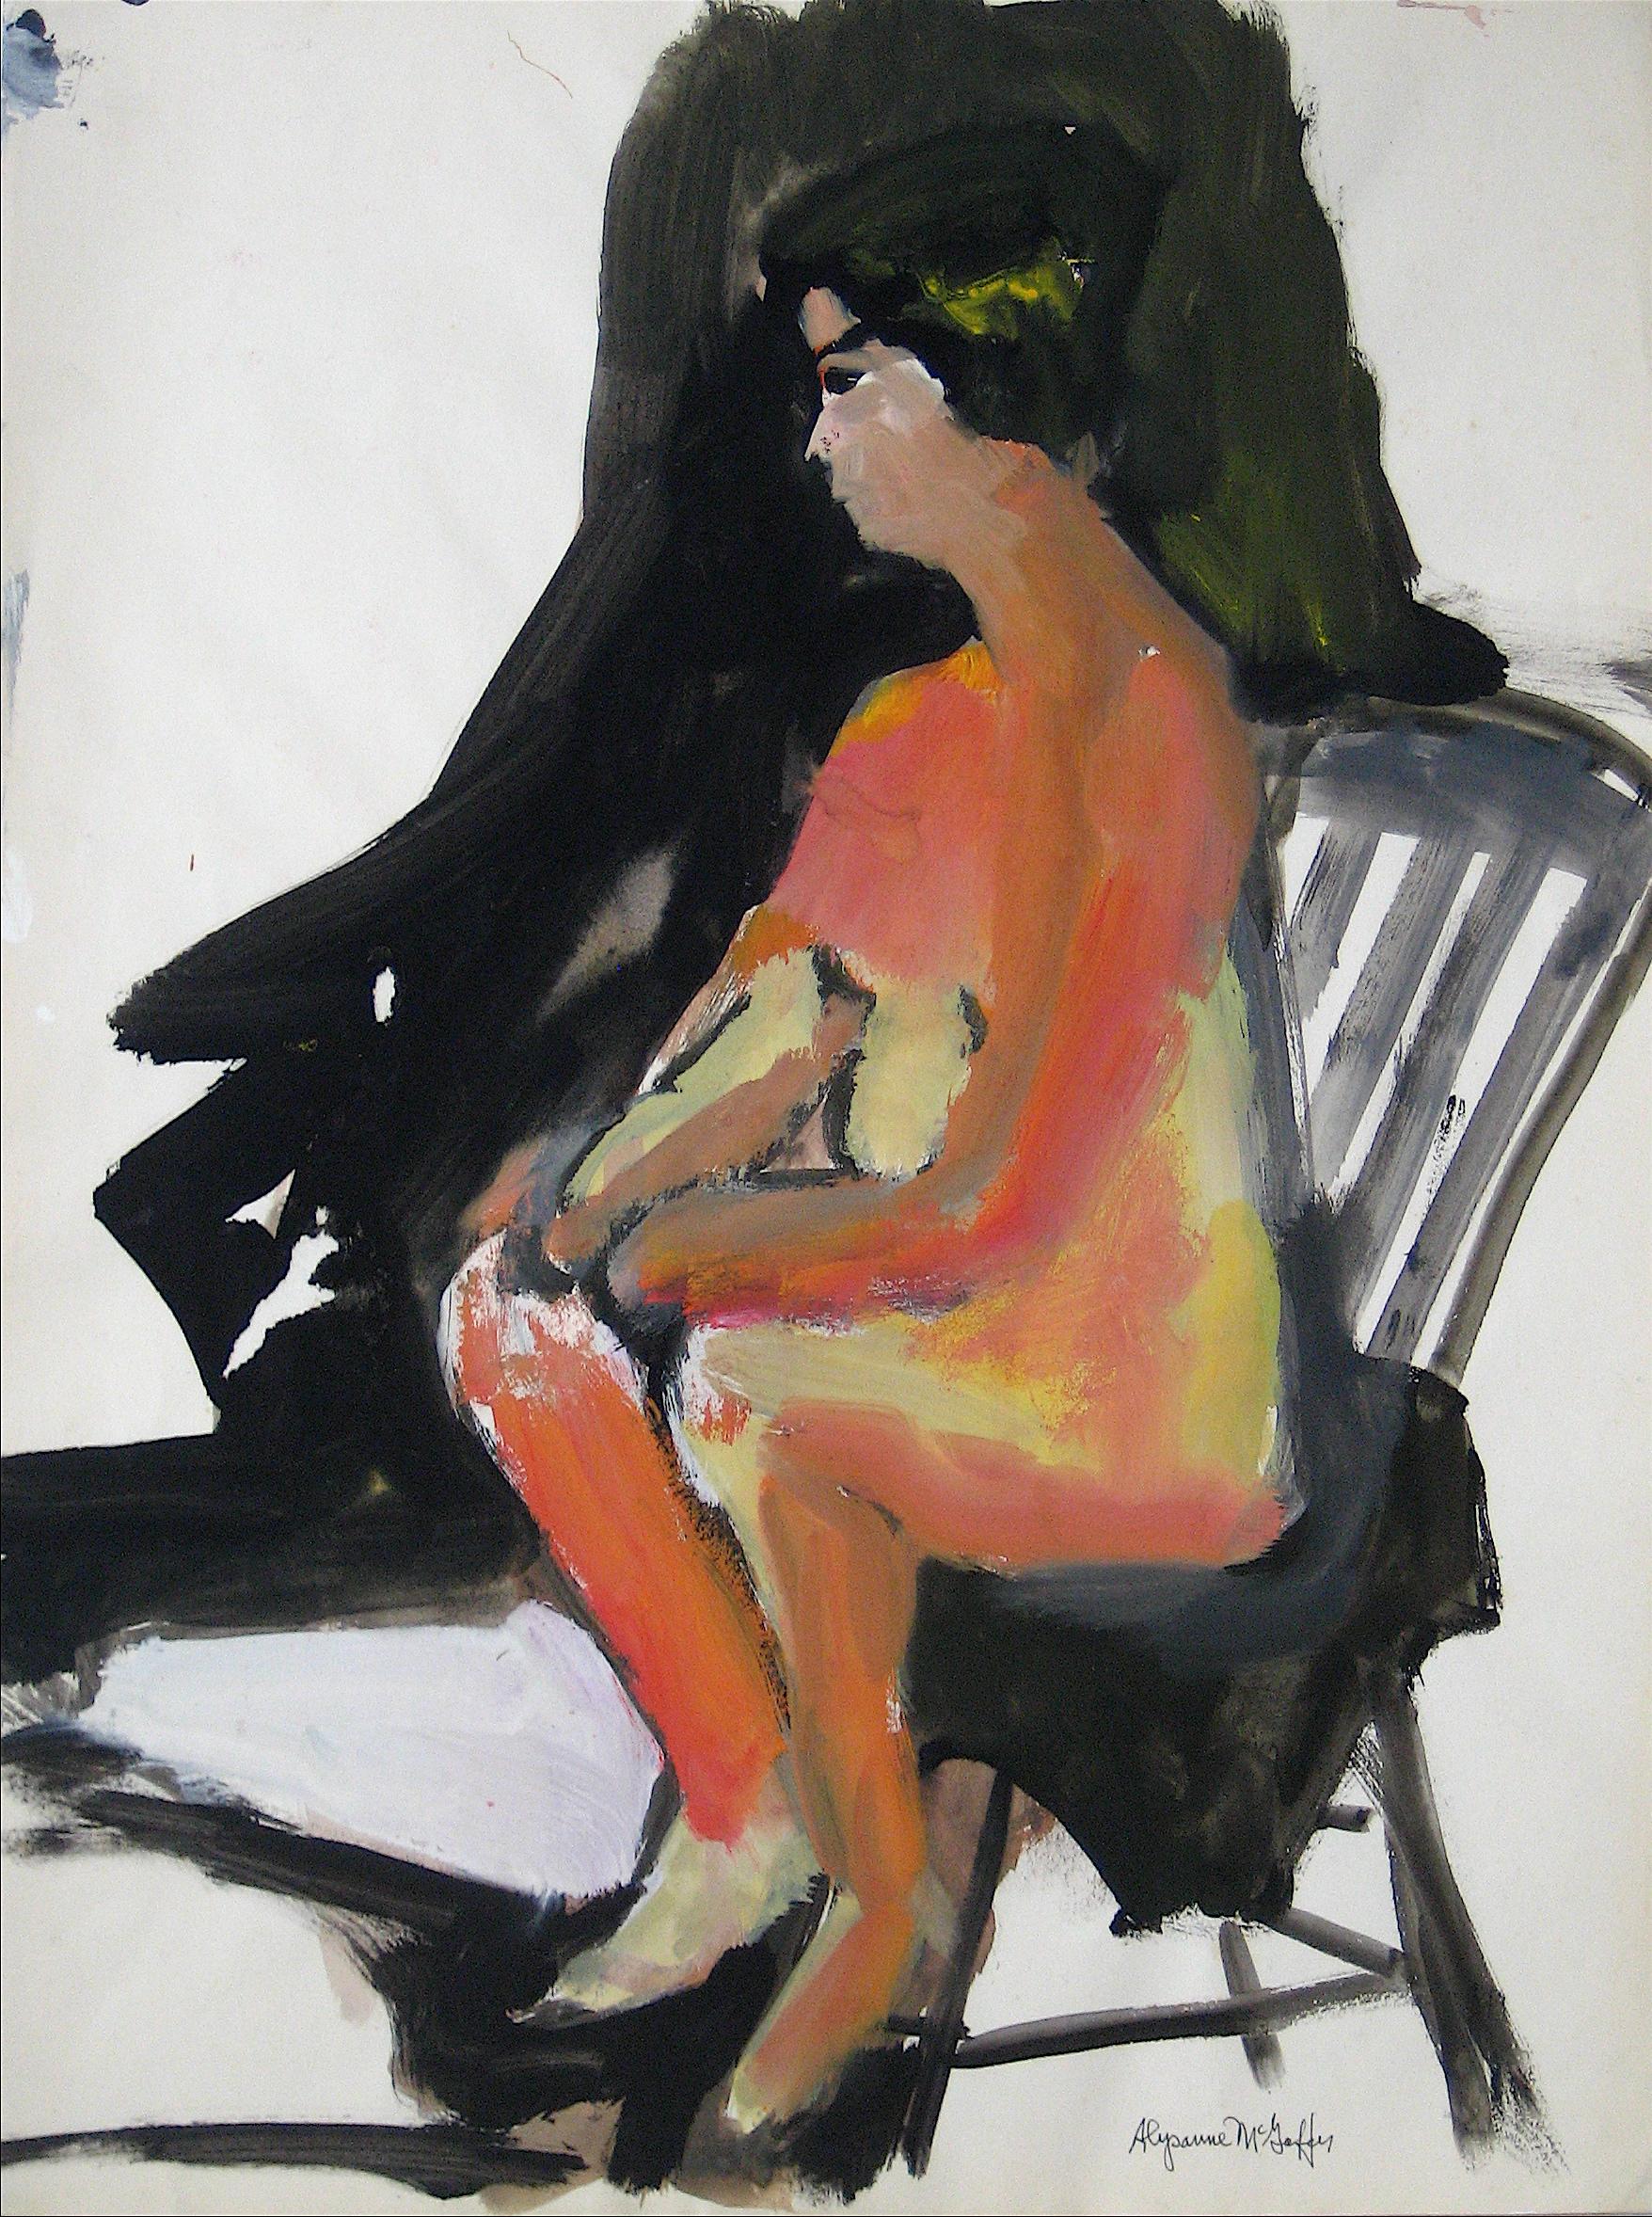 Bay Area Figurative Seated Nude Painting with Black & Peach, Circa 1950s- 1960s